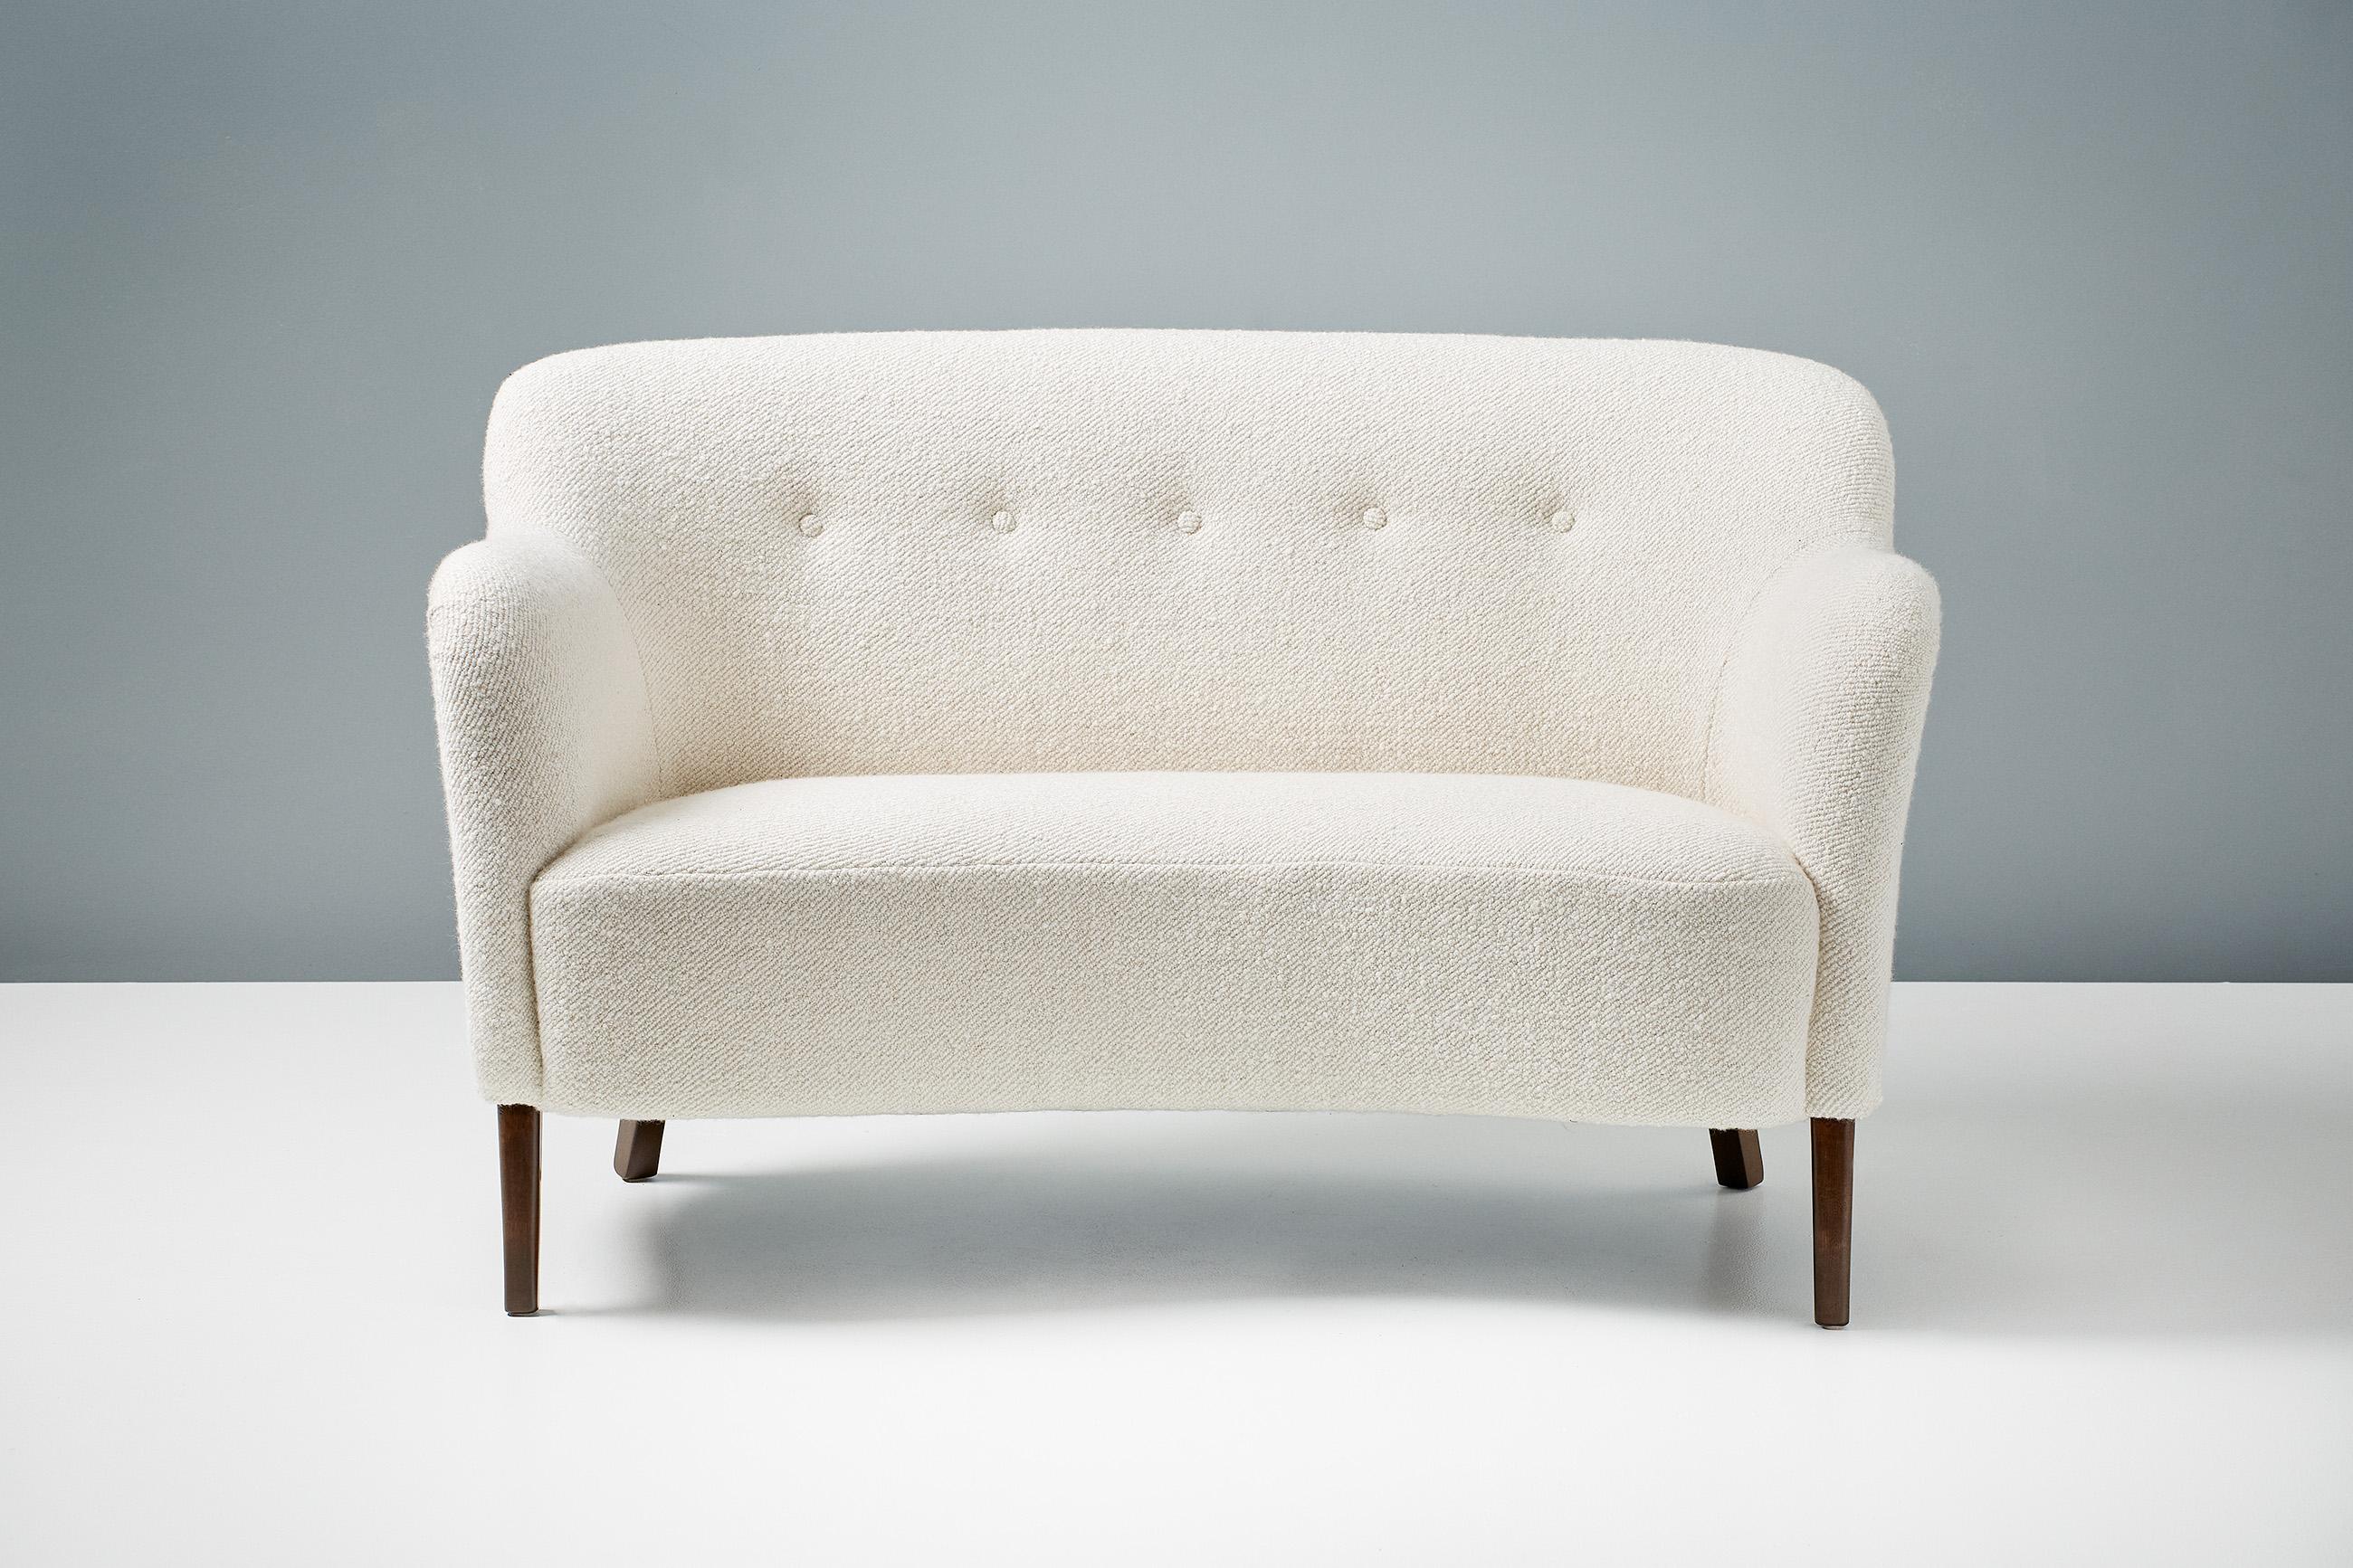 A custom-made new edition of this classic love-seat sofa by Danish designer and cabinetmaker: Alfred Kristensen. This re-edition is produced under license in Sweden by Dagmar and available to order in a range of upholstery and wood